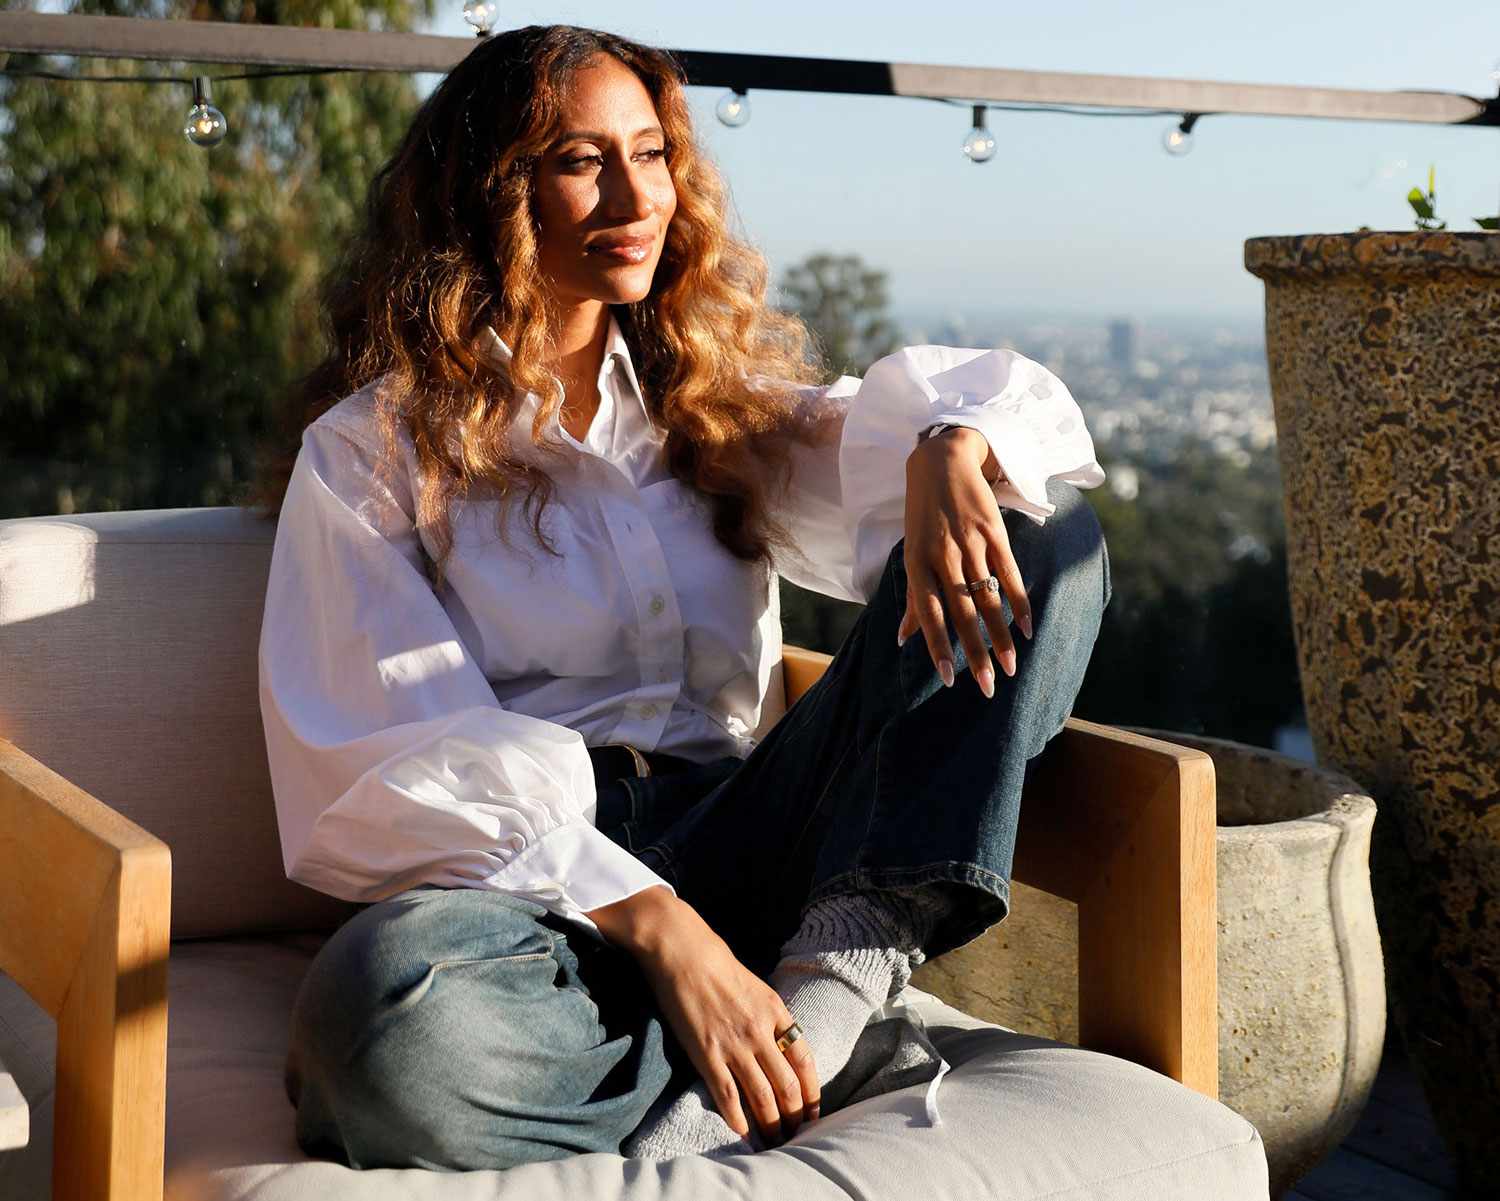 BirthFund about Elaine Welteroth and Kelly Rowland